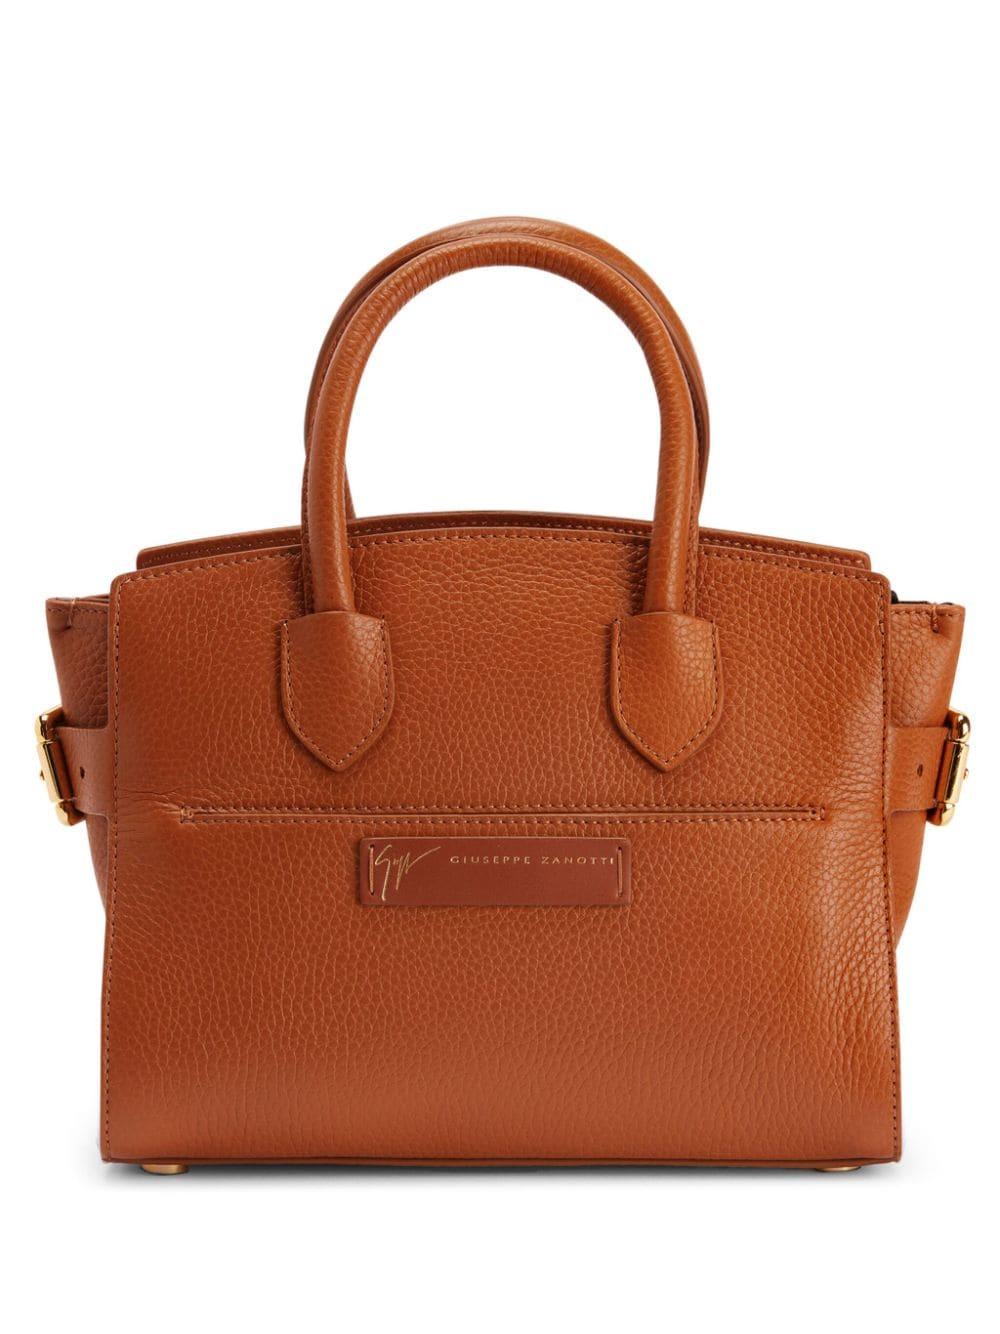 Giuseppe Zanotti Angelina Leather Tote Bag in Brown | Lyst